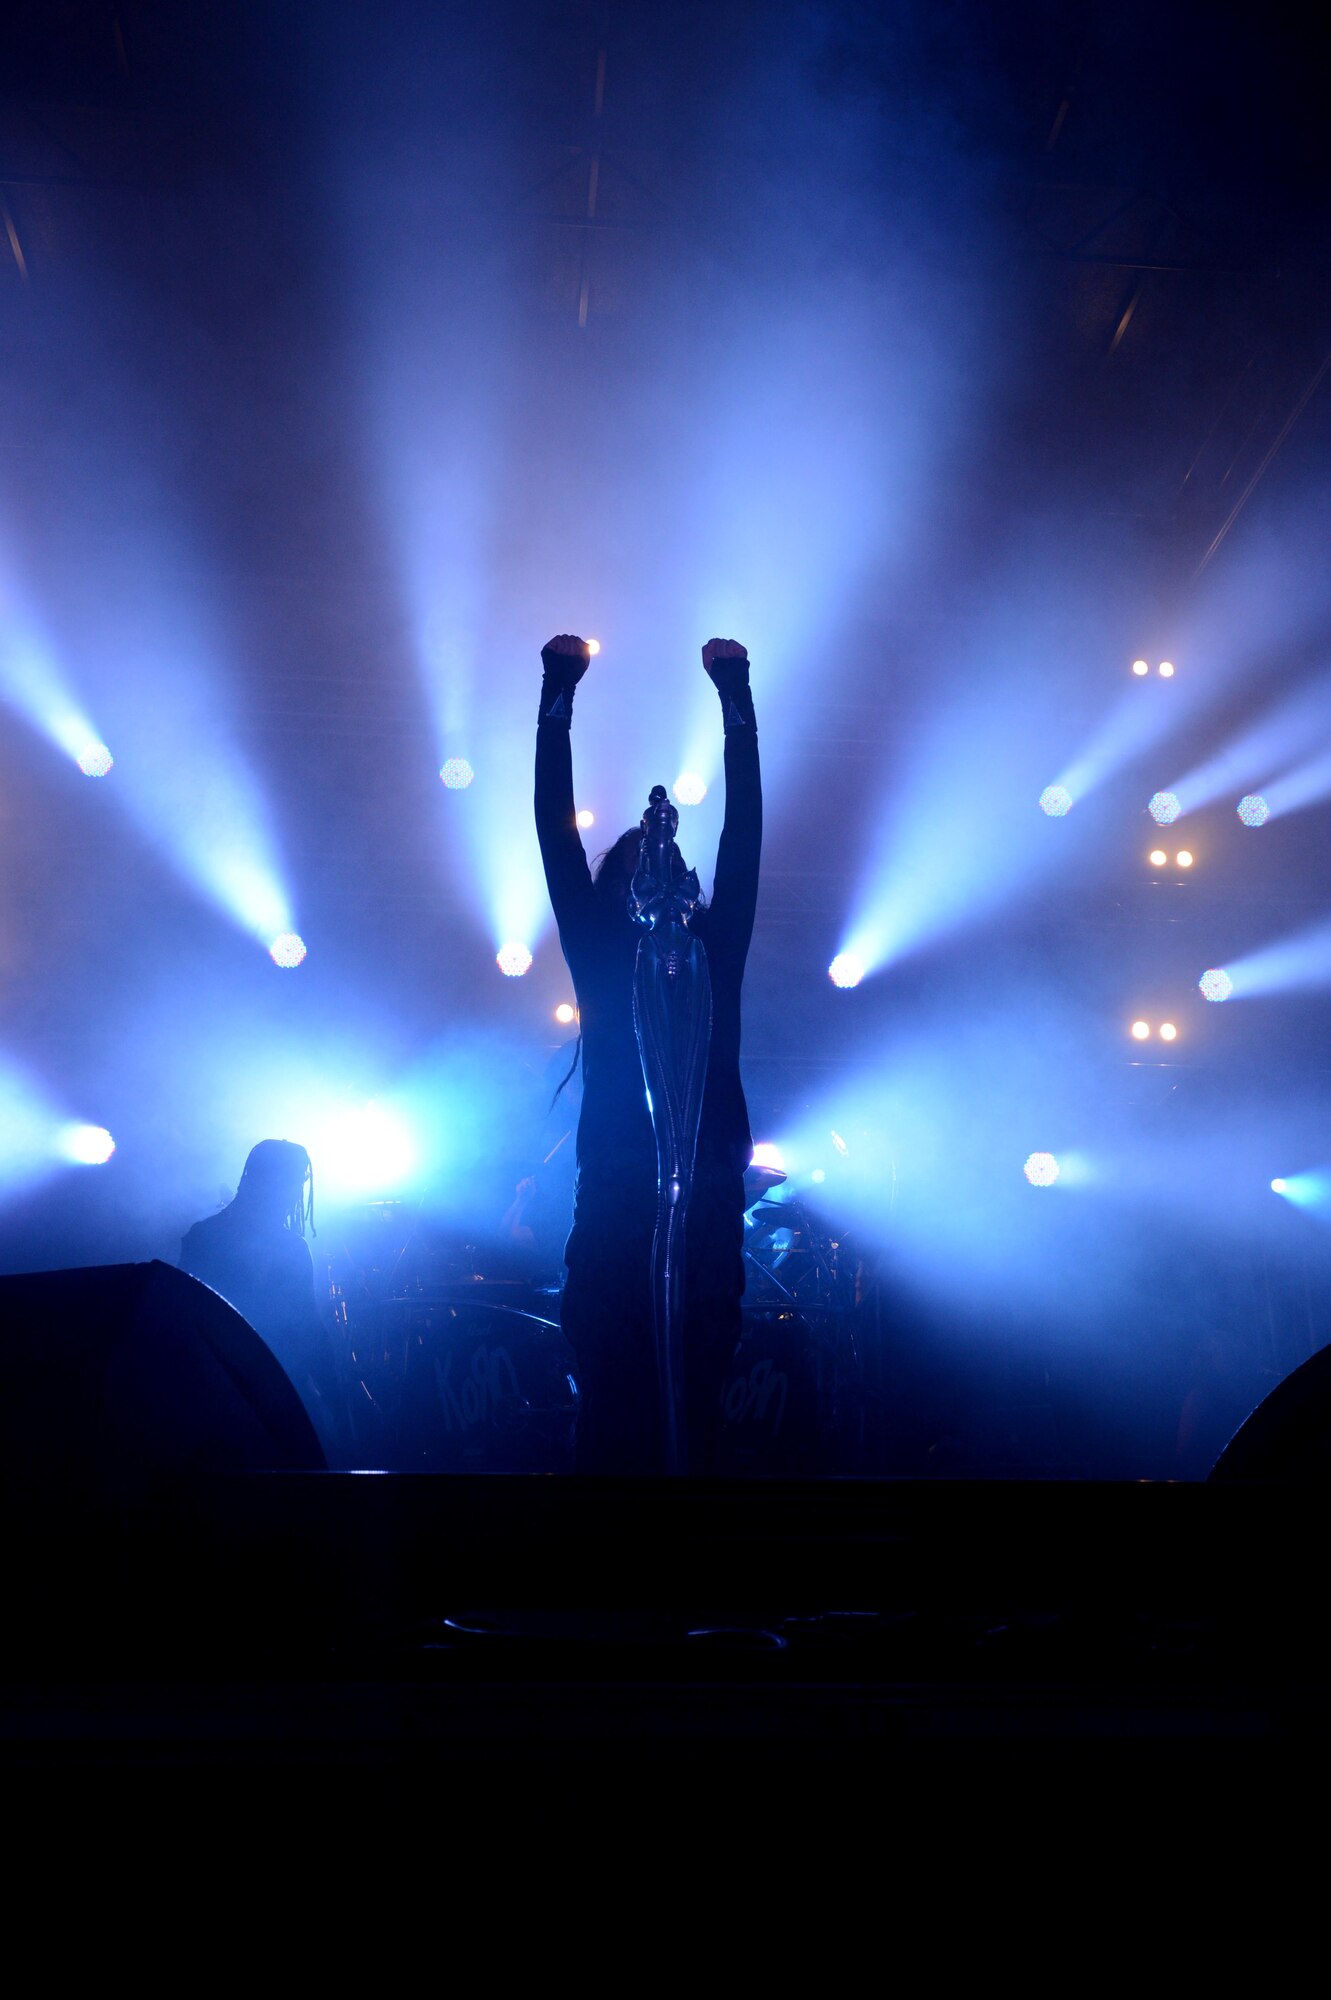 SPANGDAHLEM AIR BASE, Germany – Jonathan Davis throws his hands in the air during a performance July 3, 2013. Korn currently has more than 40 singles and 30 music videos released. (U.S. Air Force photo by Airman 1st Class Kyle Gese/Released)